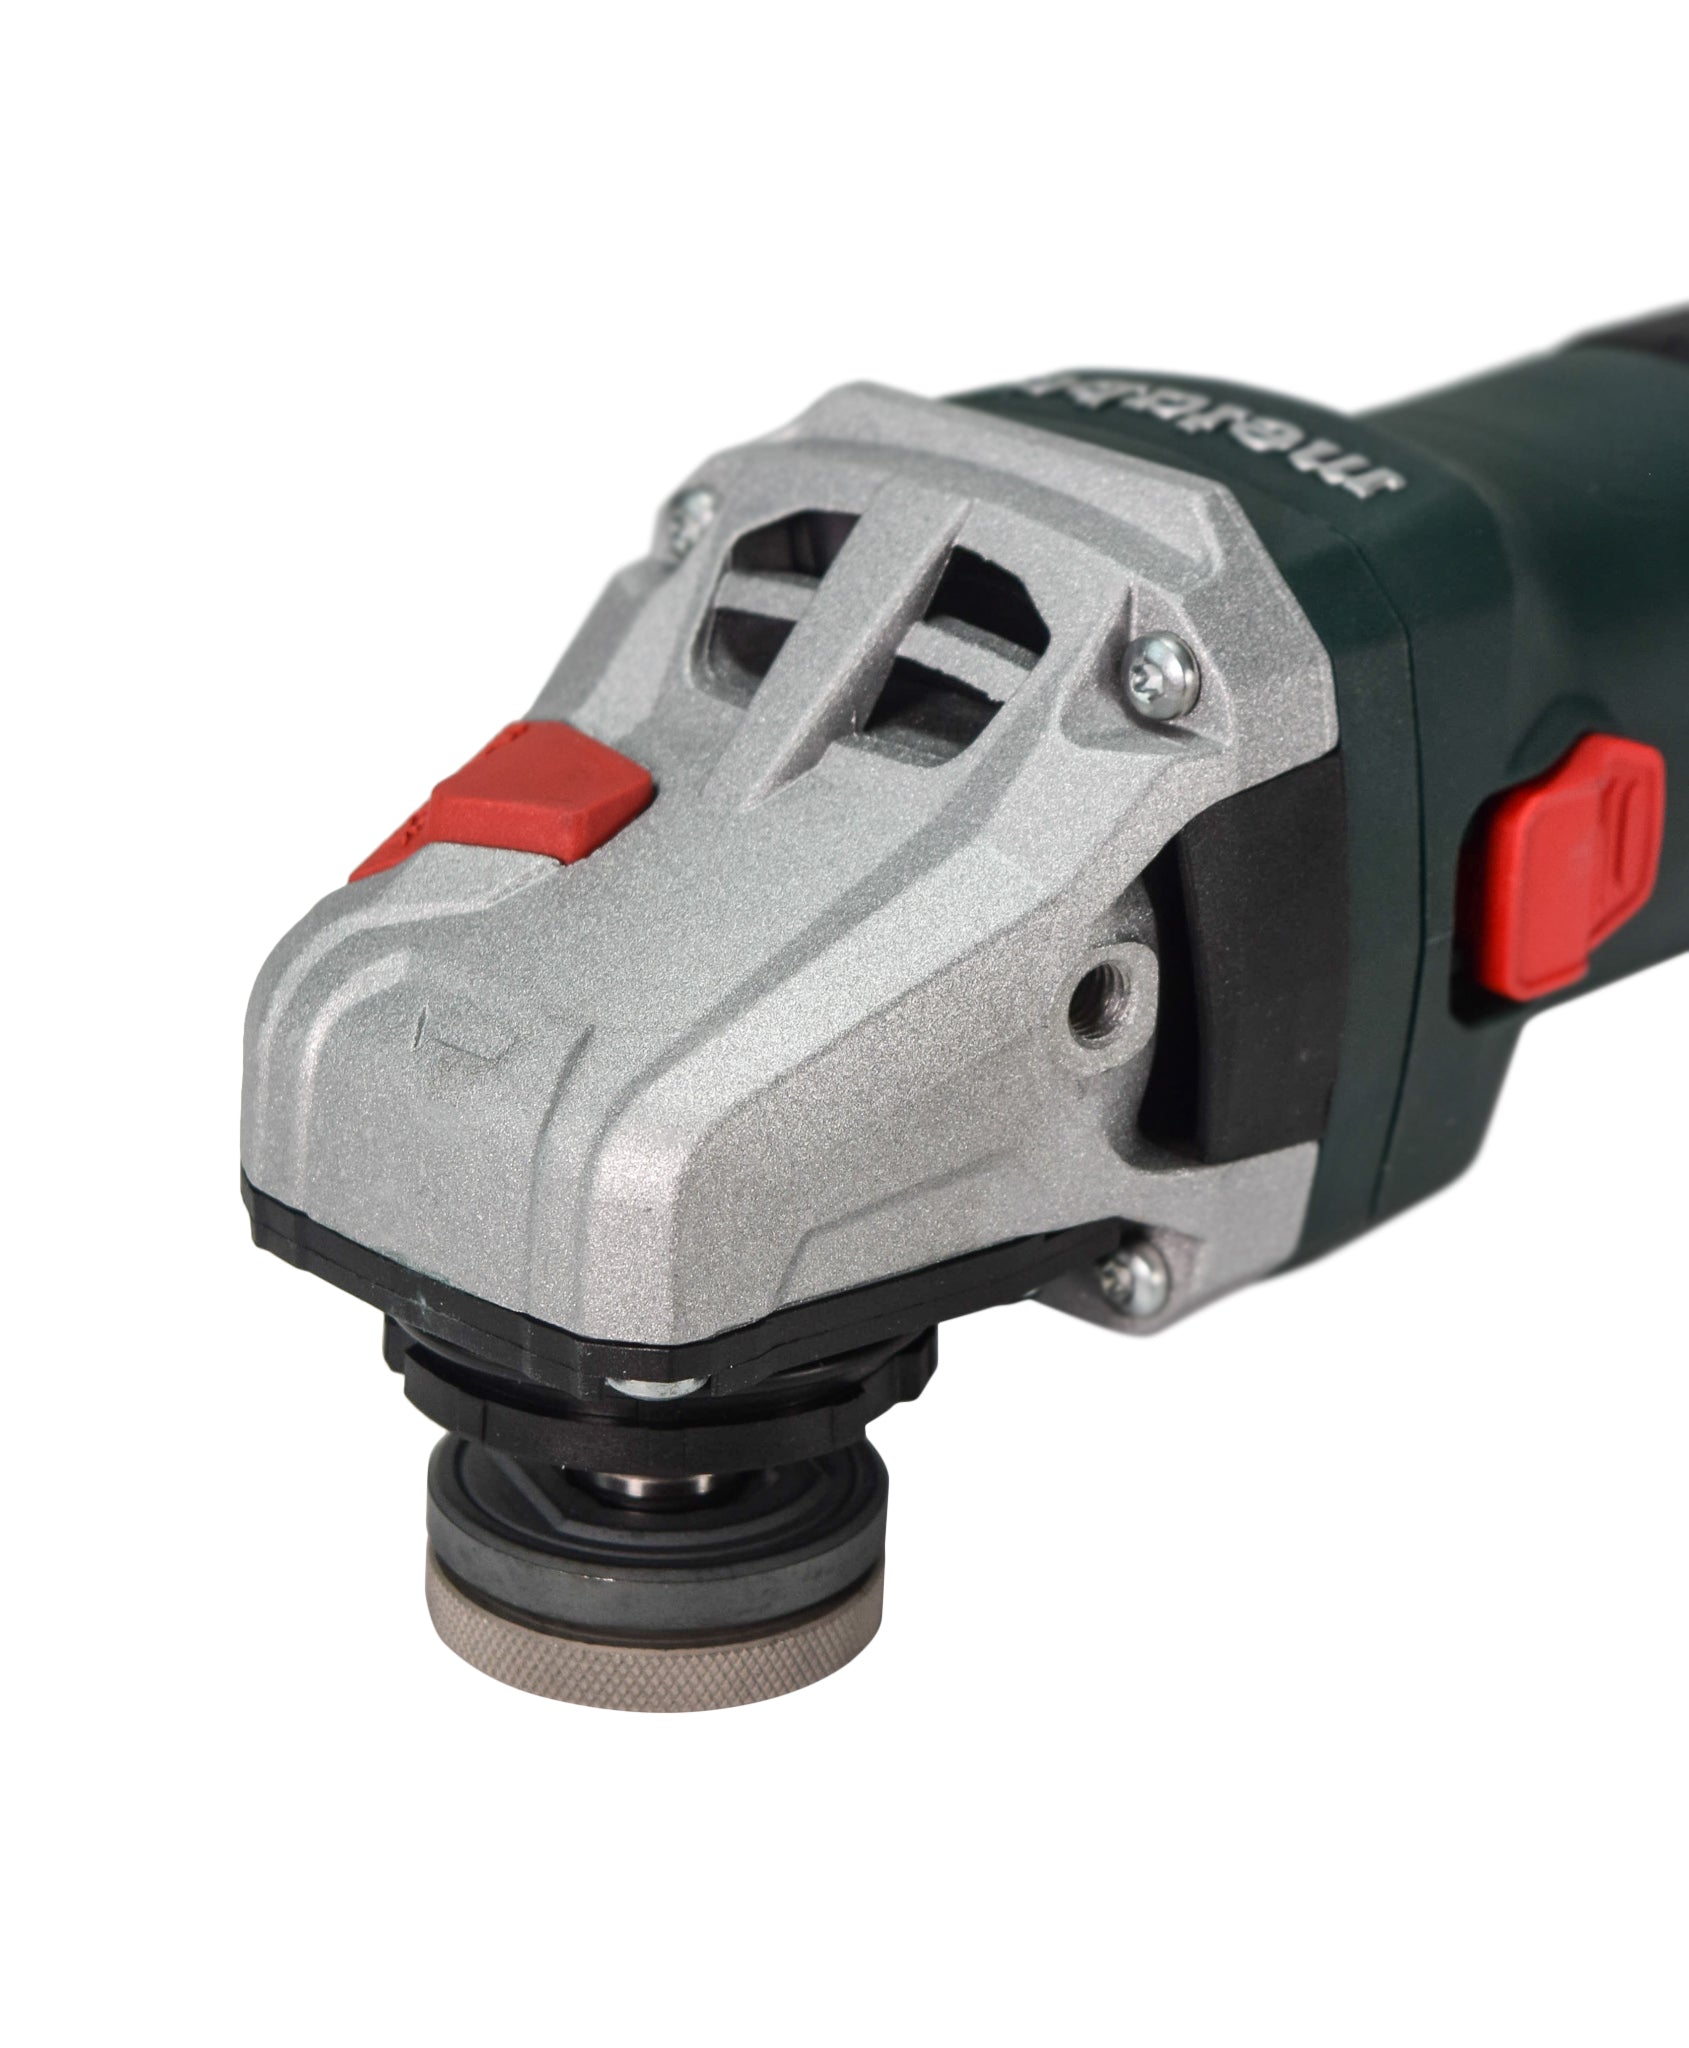 Metabo 603623420 4.5-inch/5-inch Angle Grinder 11,000 Rpm - 11.0 Amps with Lock-on